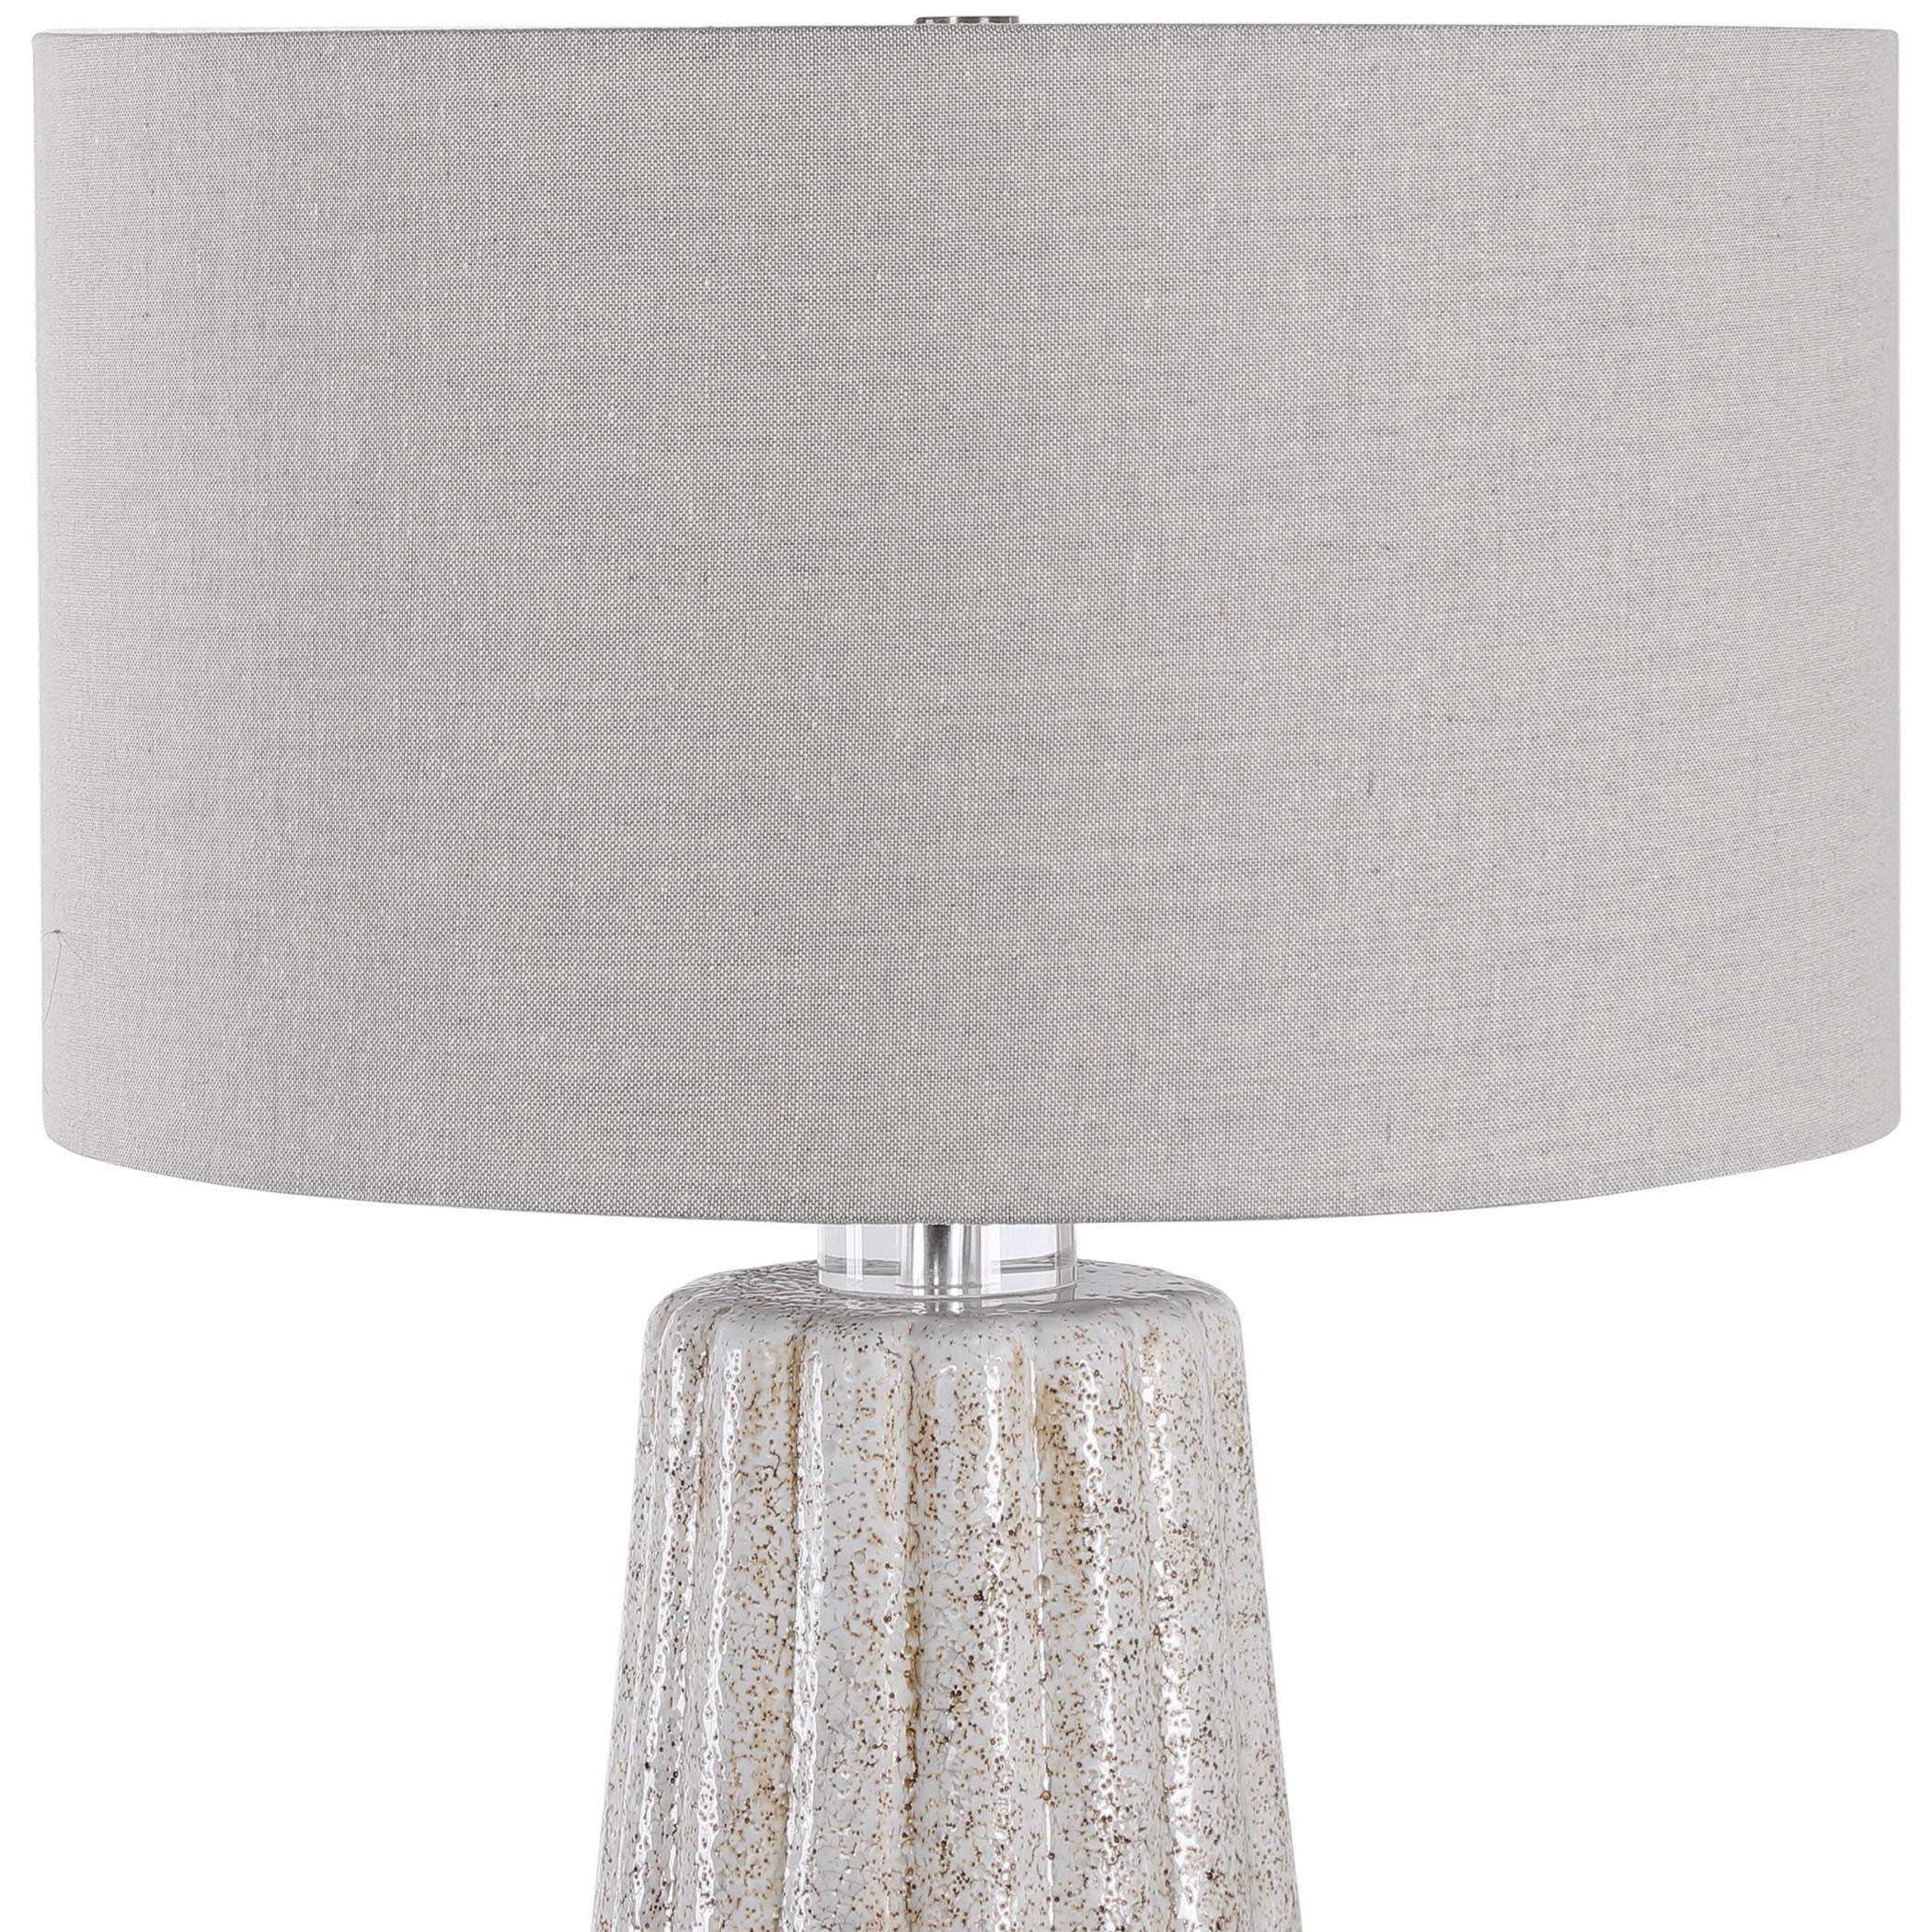 Uttermost Table Lamps Stone-Ivory Table Lamp Stuckey Furniture Lamp  Table Lamp